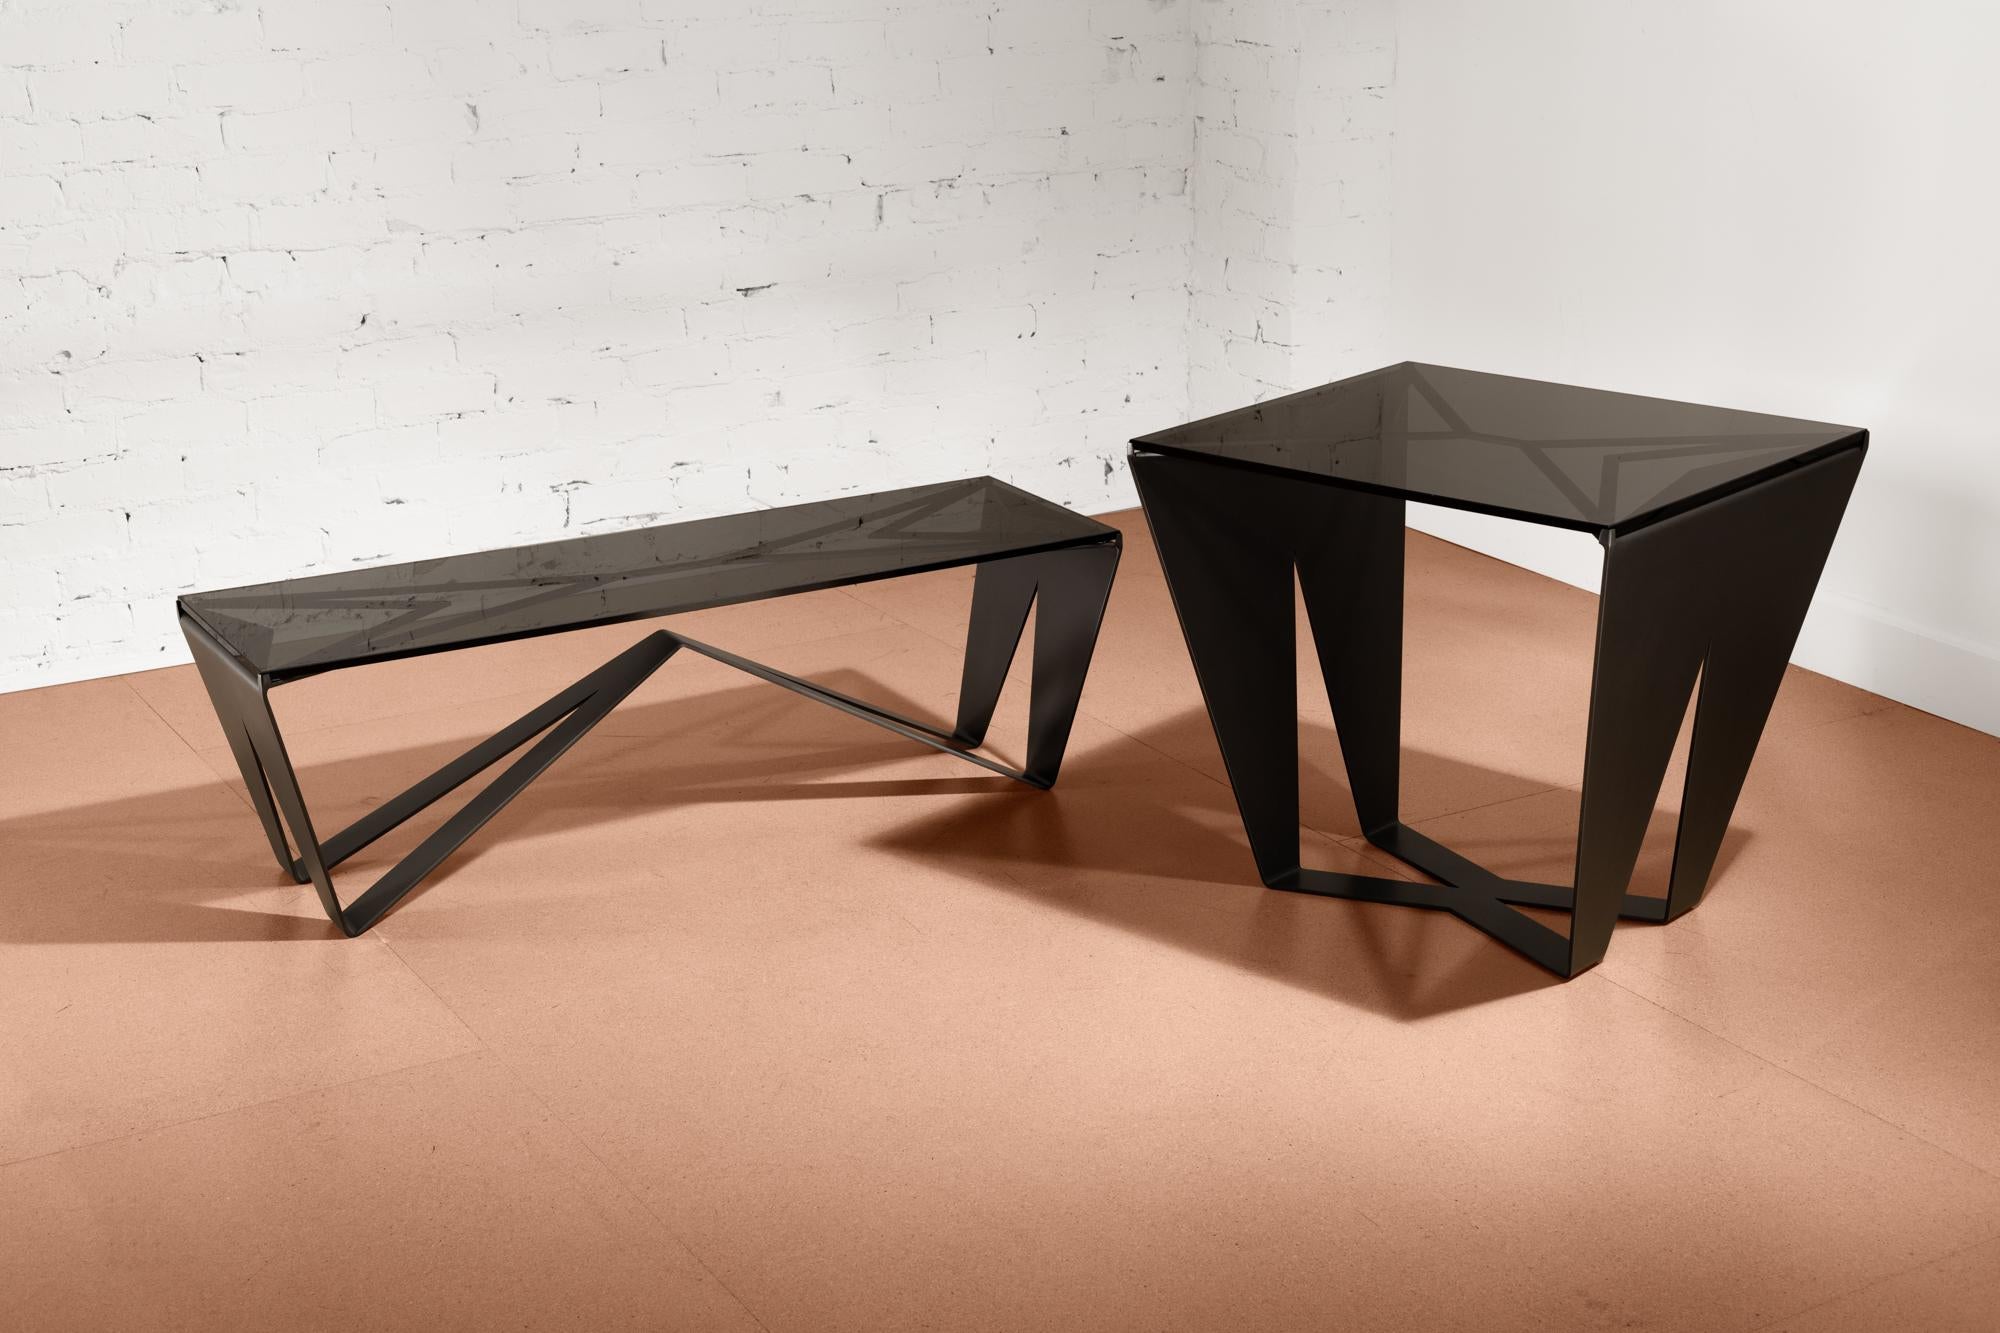 The Domino Nesting Coffee Tables are a versatile set, finely constructed and finished with satin black steel and smoked glass. These tables are as functional as they are art furniture for the home. The half-inch thick, smoked gray glass tops expose